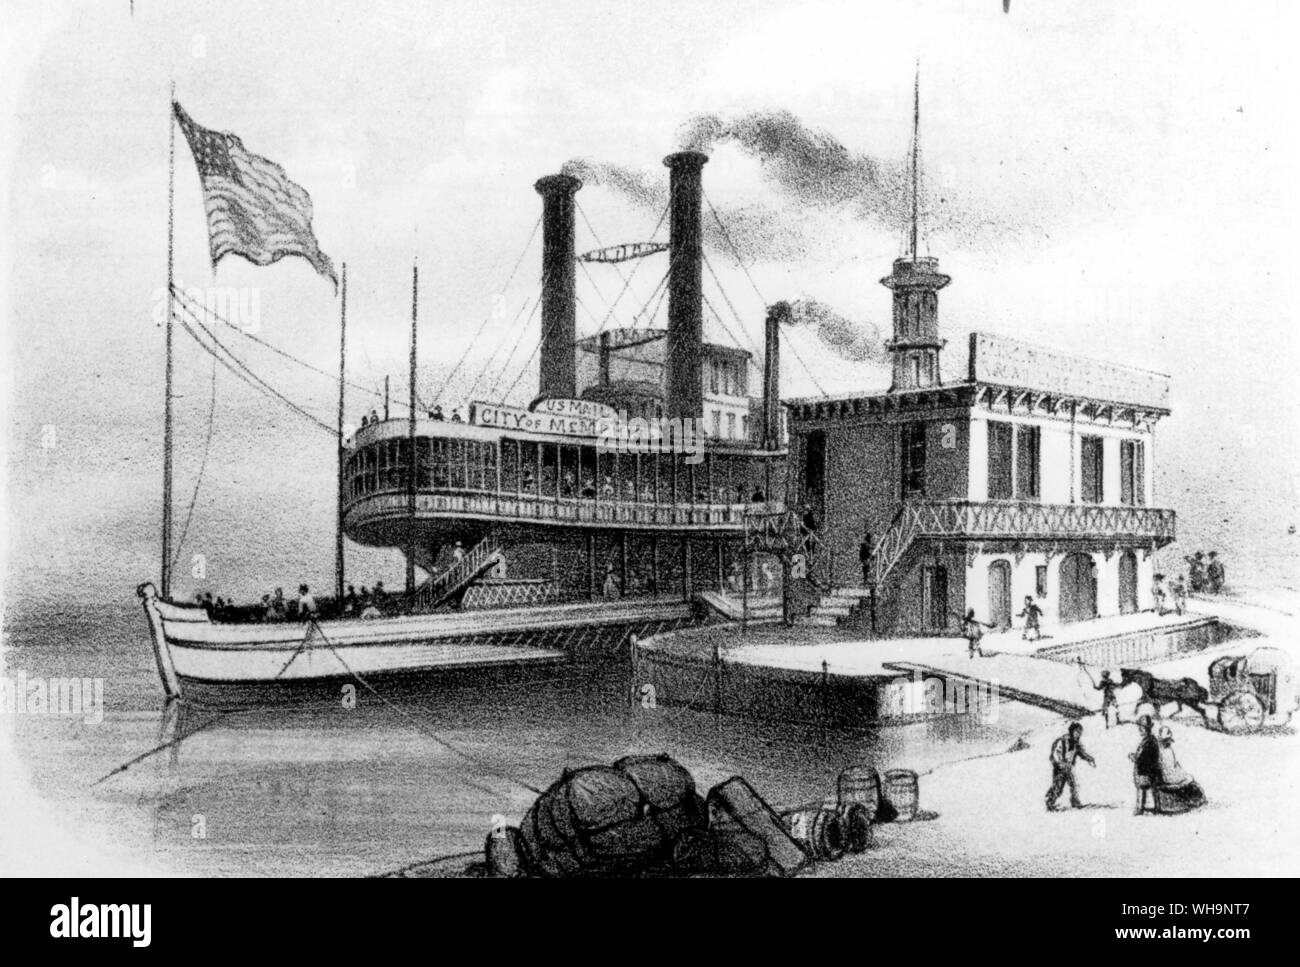 'The City of Memphis is the largest boat in the trade... I can get a reputation on her.' Letter to Orion, 1859 - photo from Mark Twain's biography Stock Photo